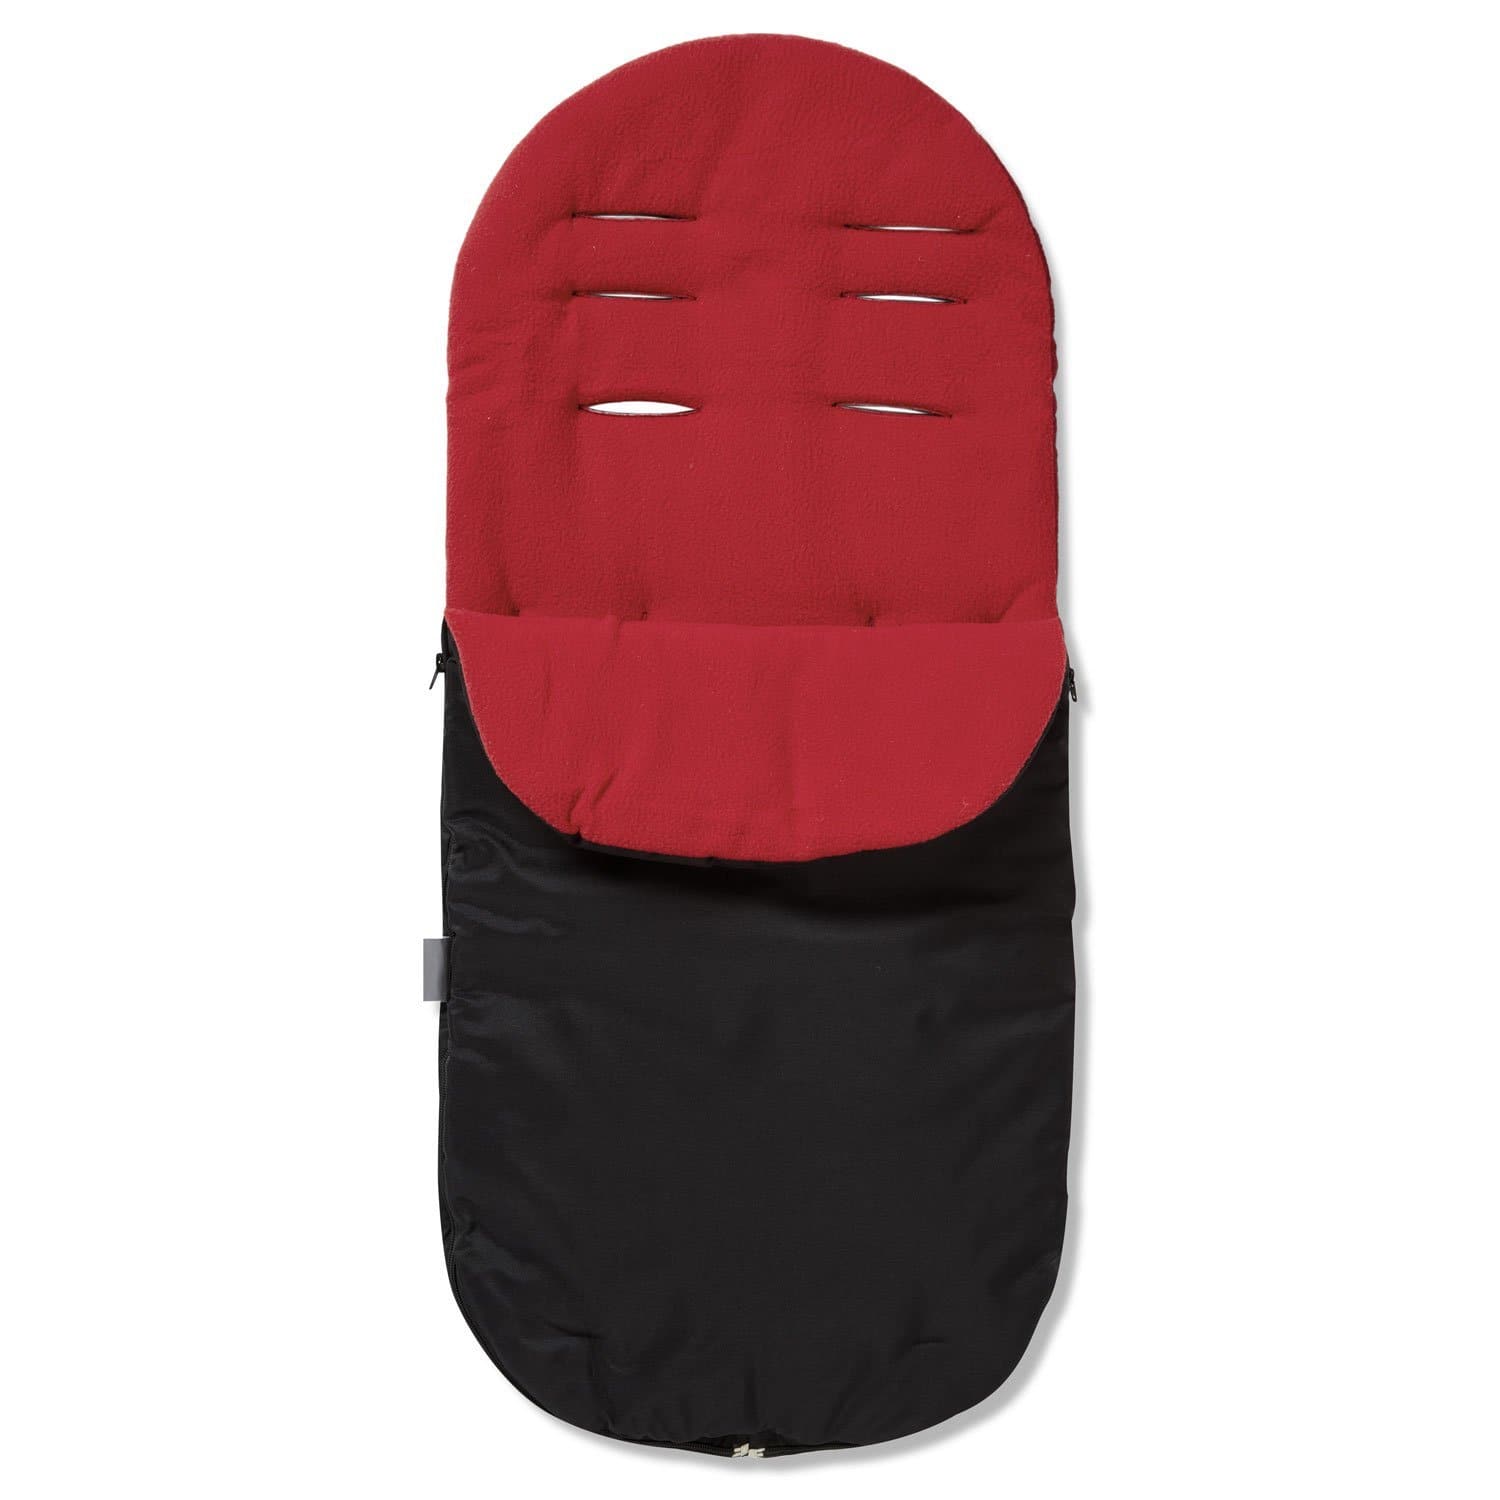 Footmuff / Cosy Toes Compatible with Quax - Red / Fits All Models | For Your Little One